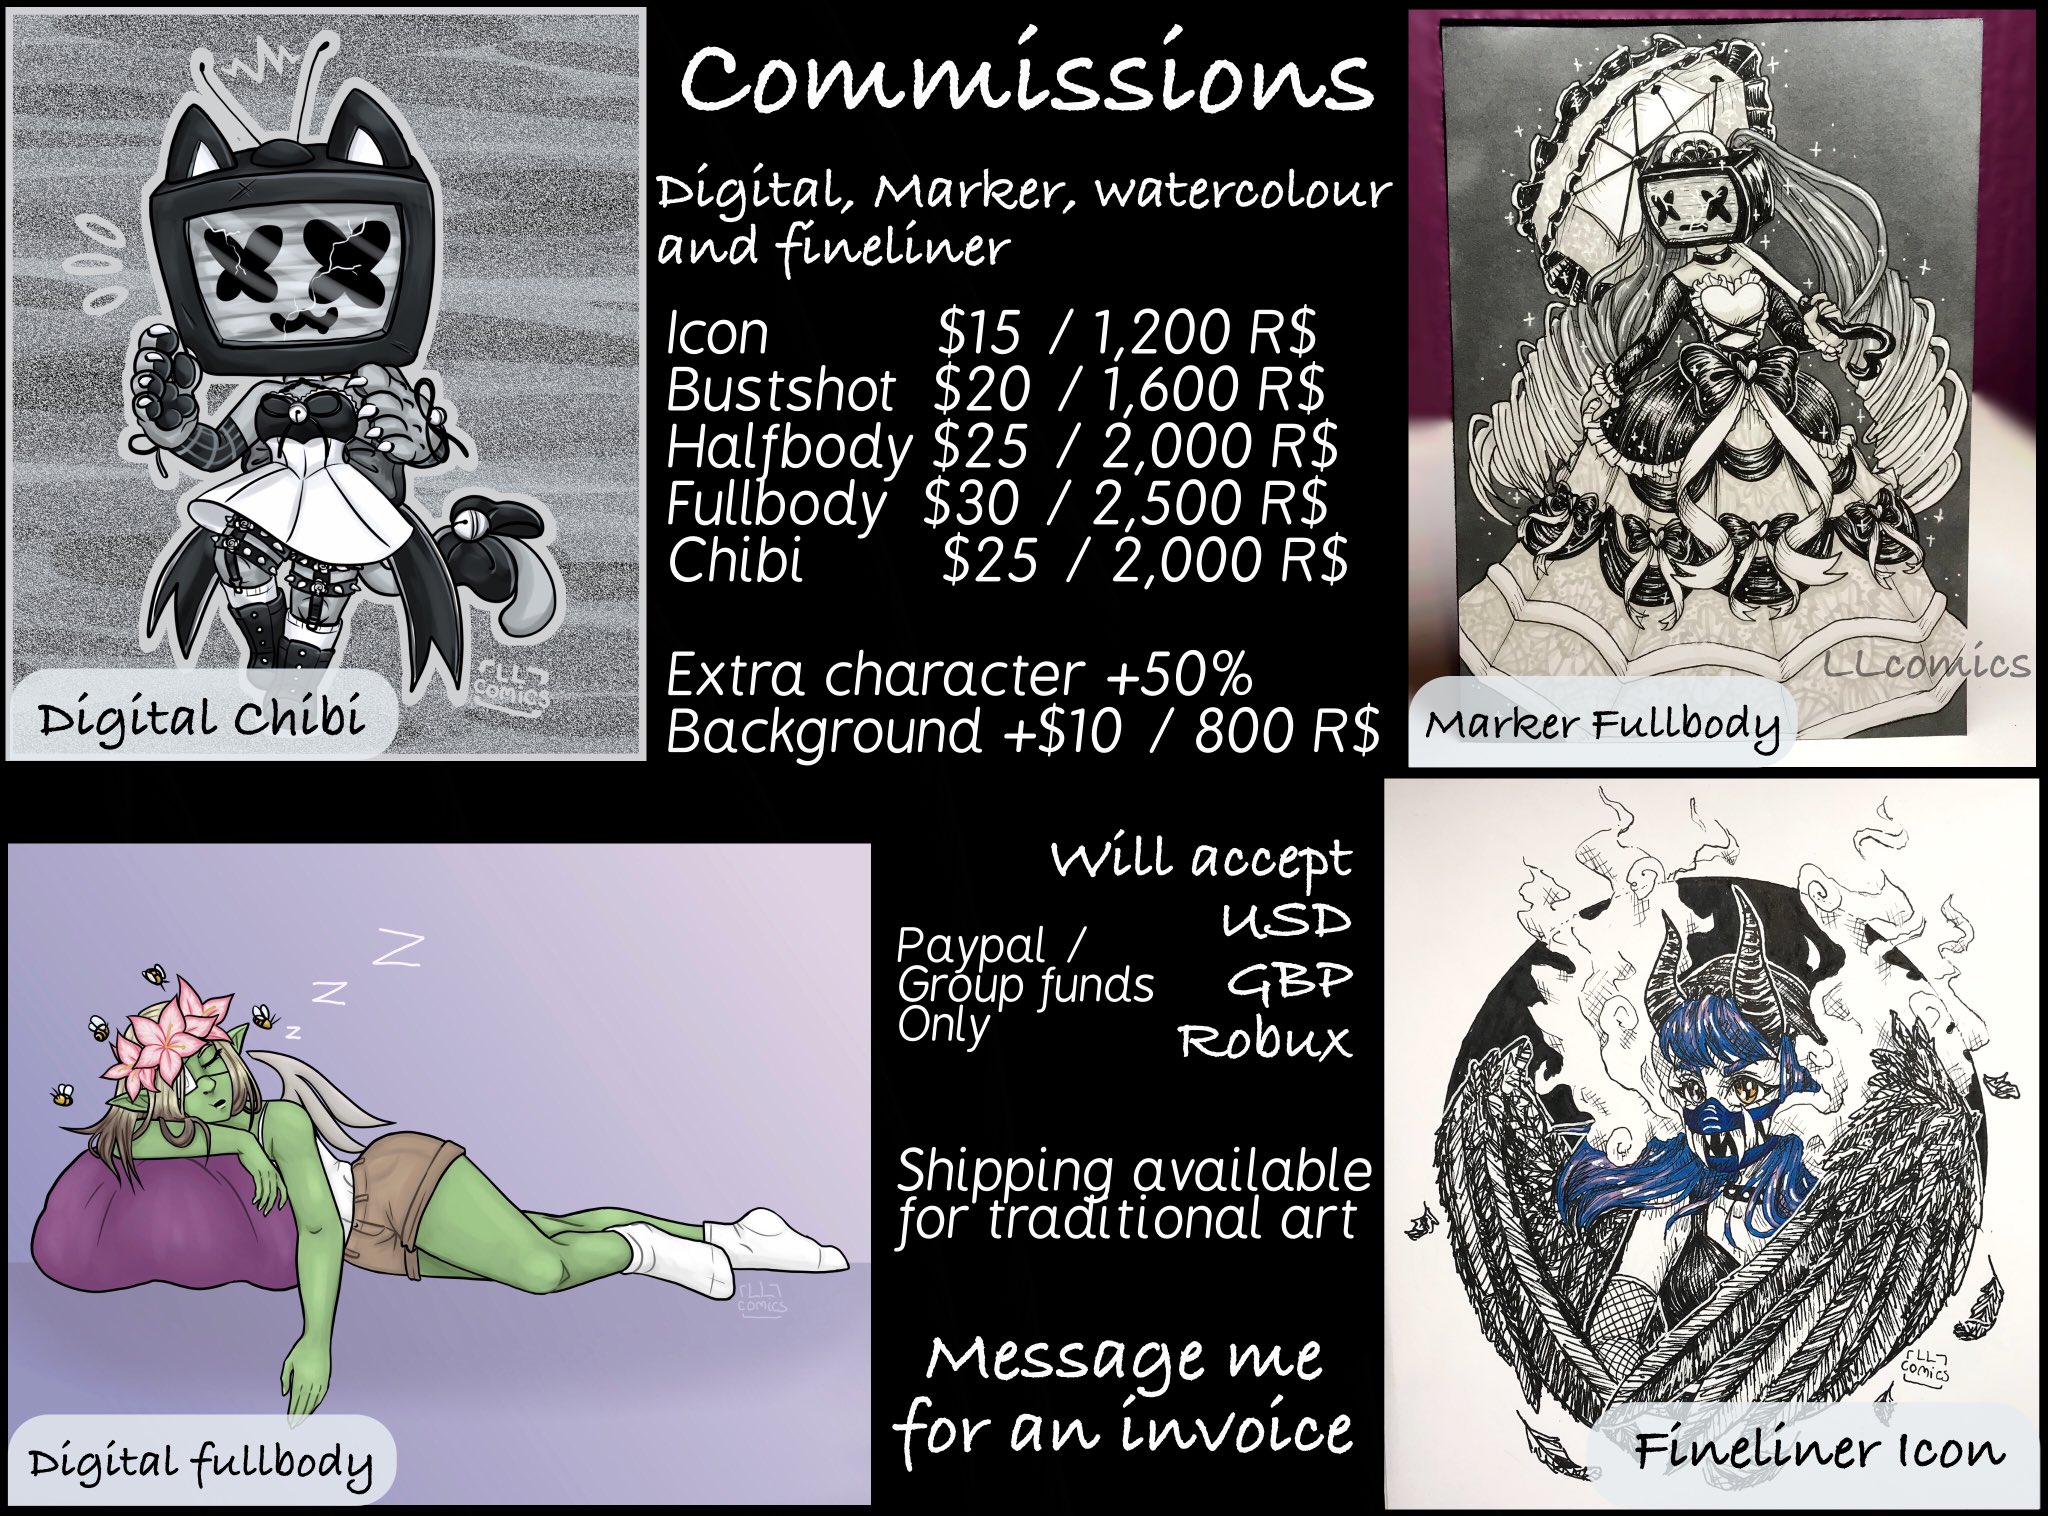 Llcomics Wearetherhtc On Twitter Commission Prices More Art Examples Will Be Posted In The Thread As Well As Some Rules Roblox Royalehigh - how much money have you spent on robux roblox amino